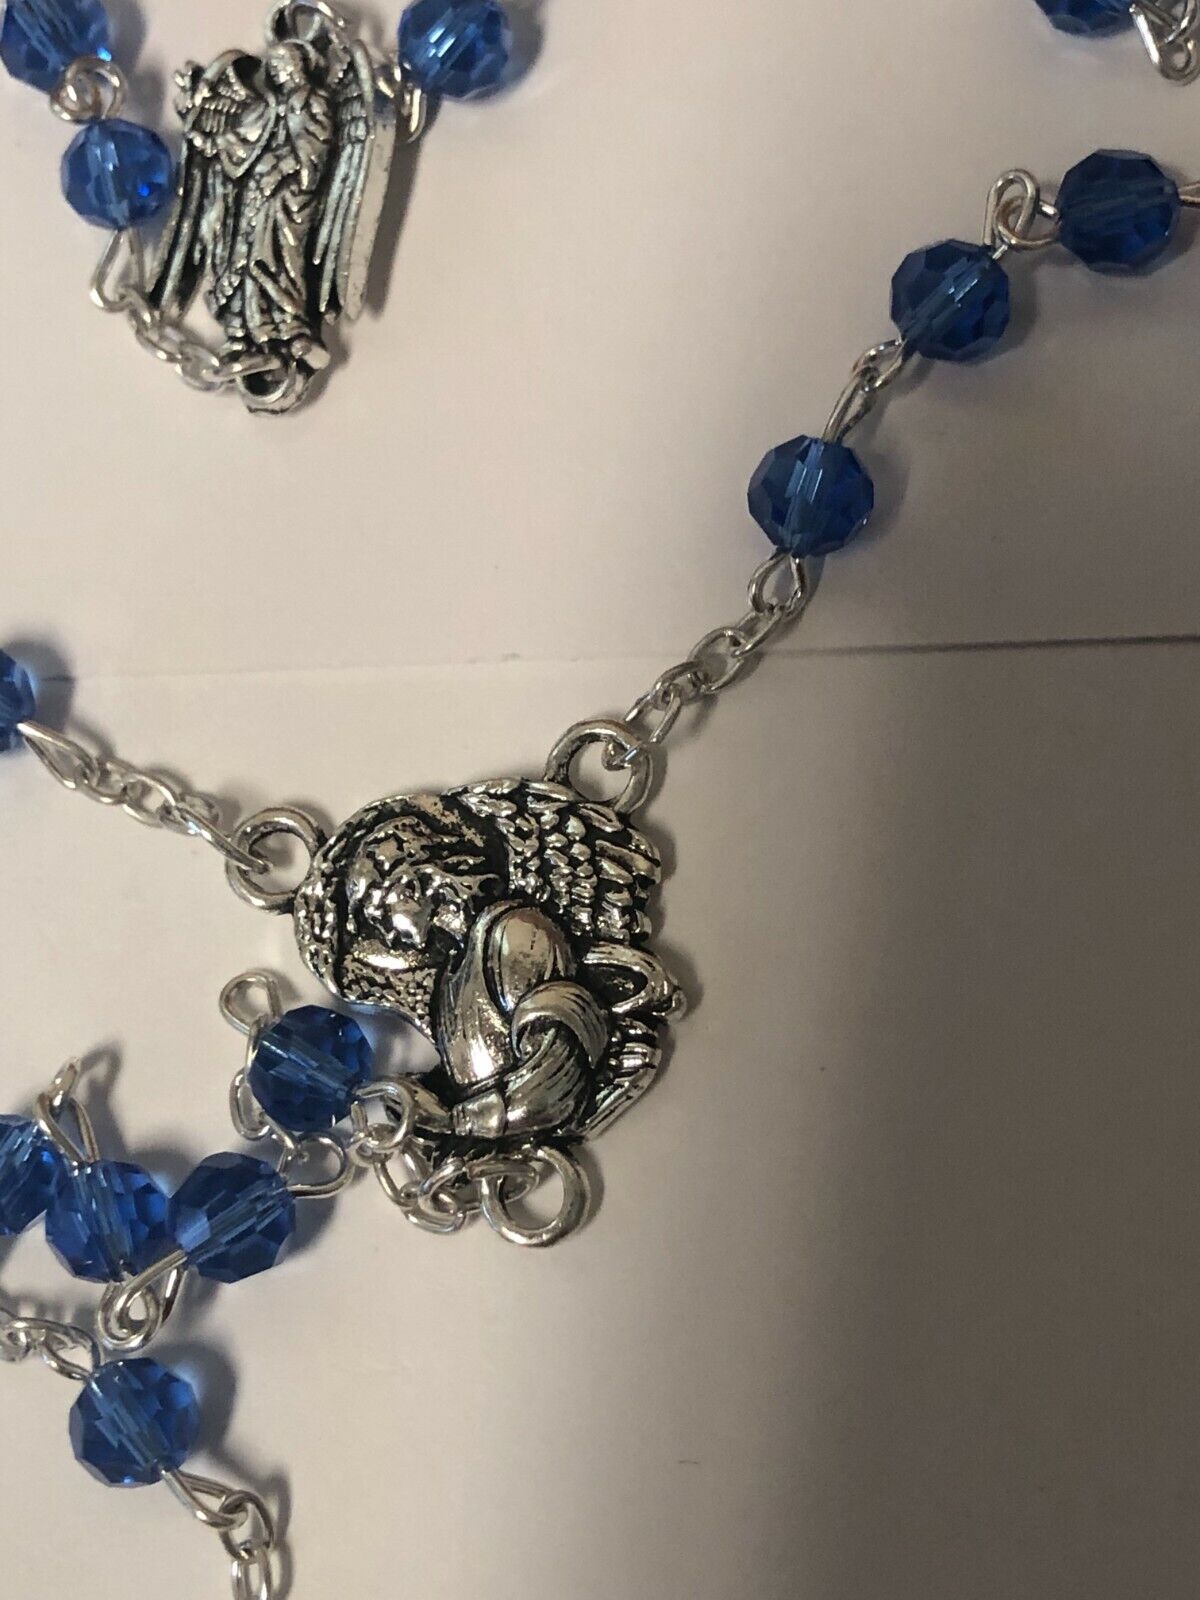 Blue Crystals Archangel Rosary, New - Bob and Penny Lord